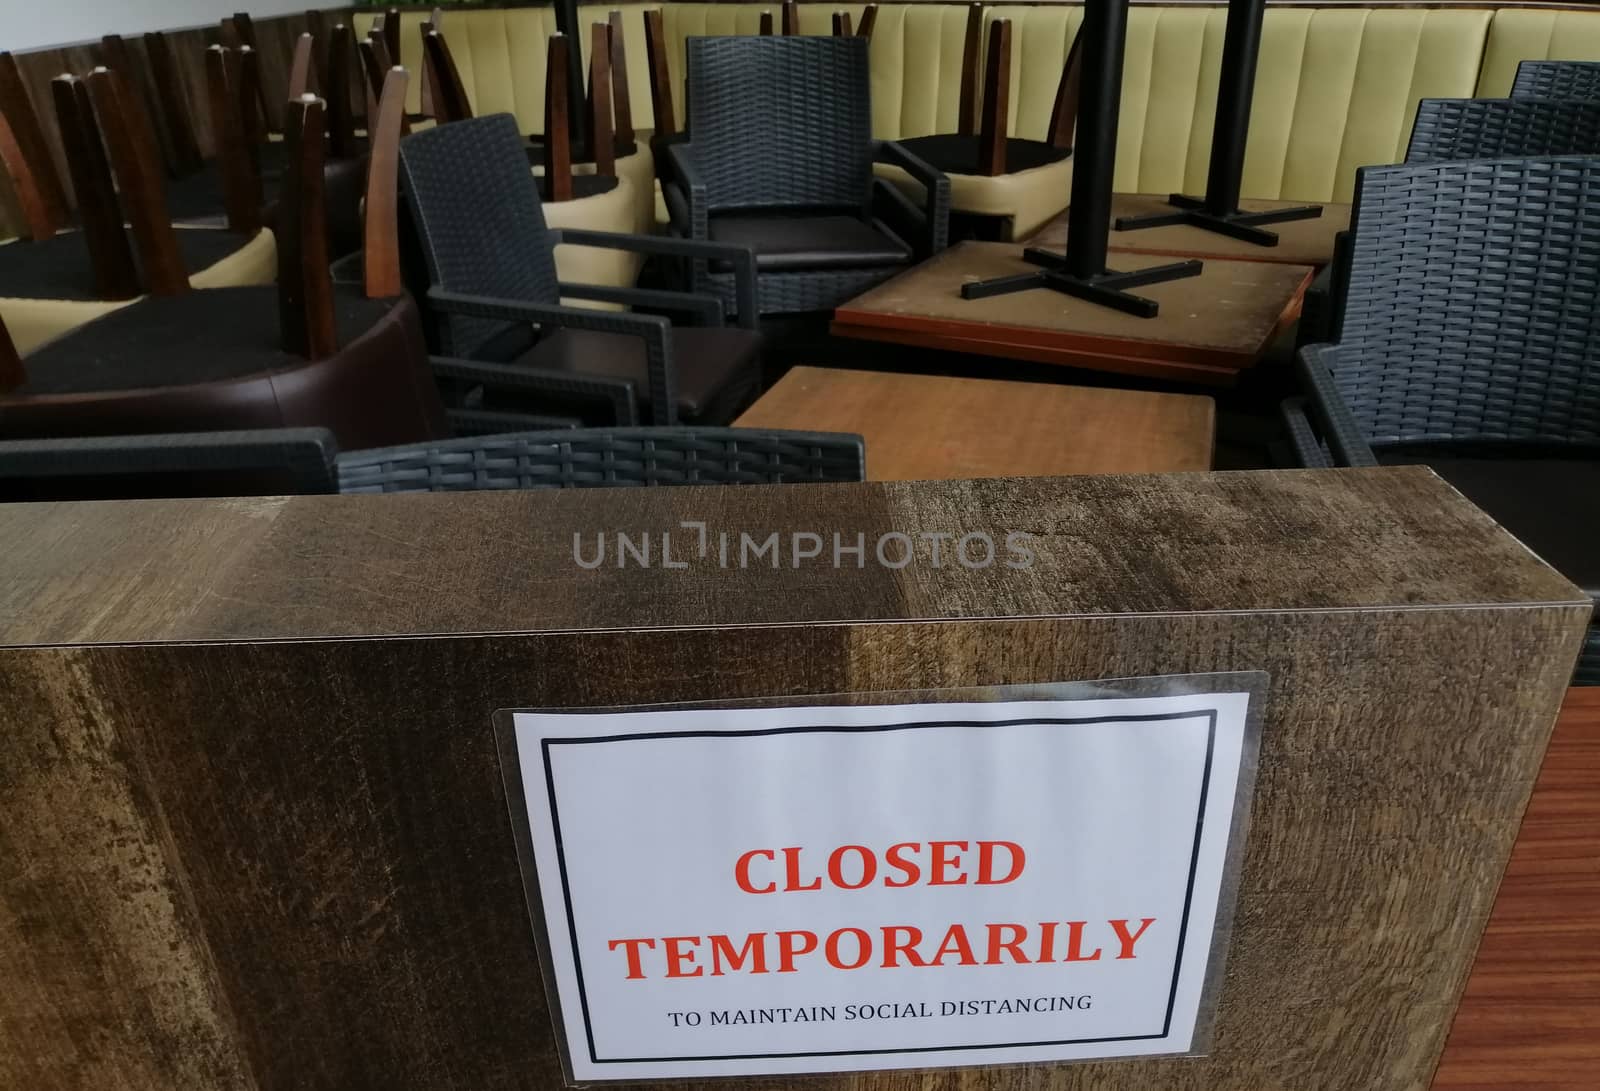 Closed temporarily - notice board on cafe ,  shut down business during coronavirus pandemic, covid-19 outbreak. Lockdown, isolation, small business bankruptcy concept.